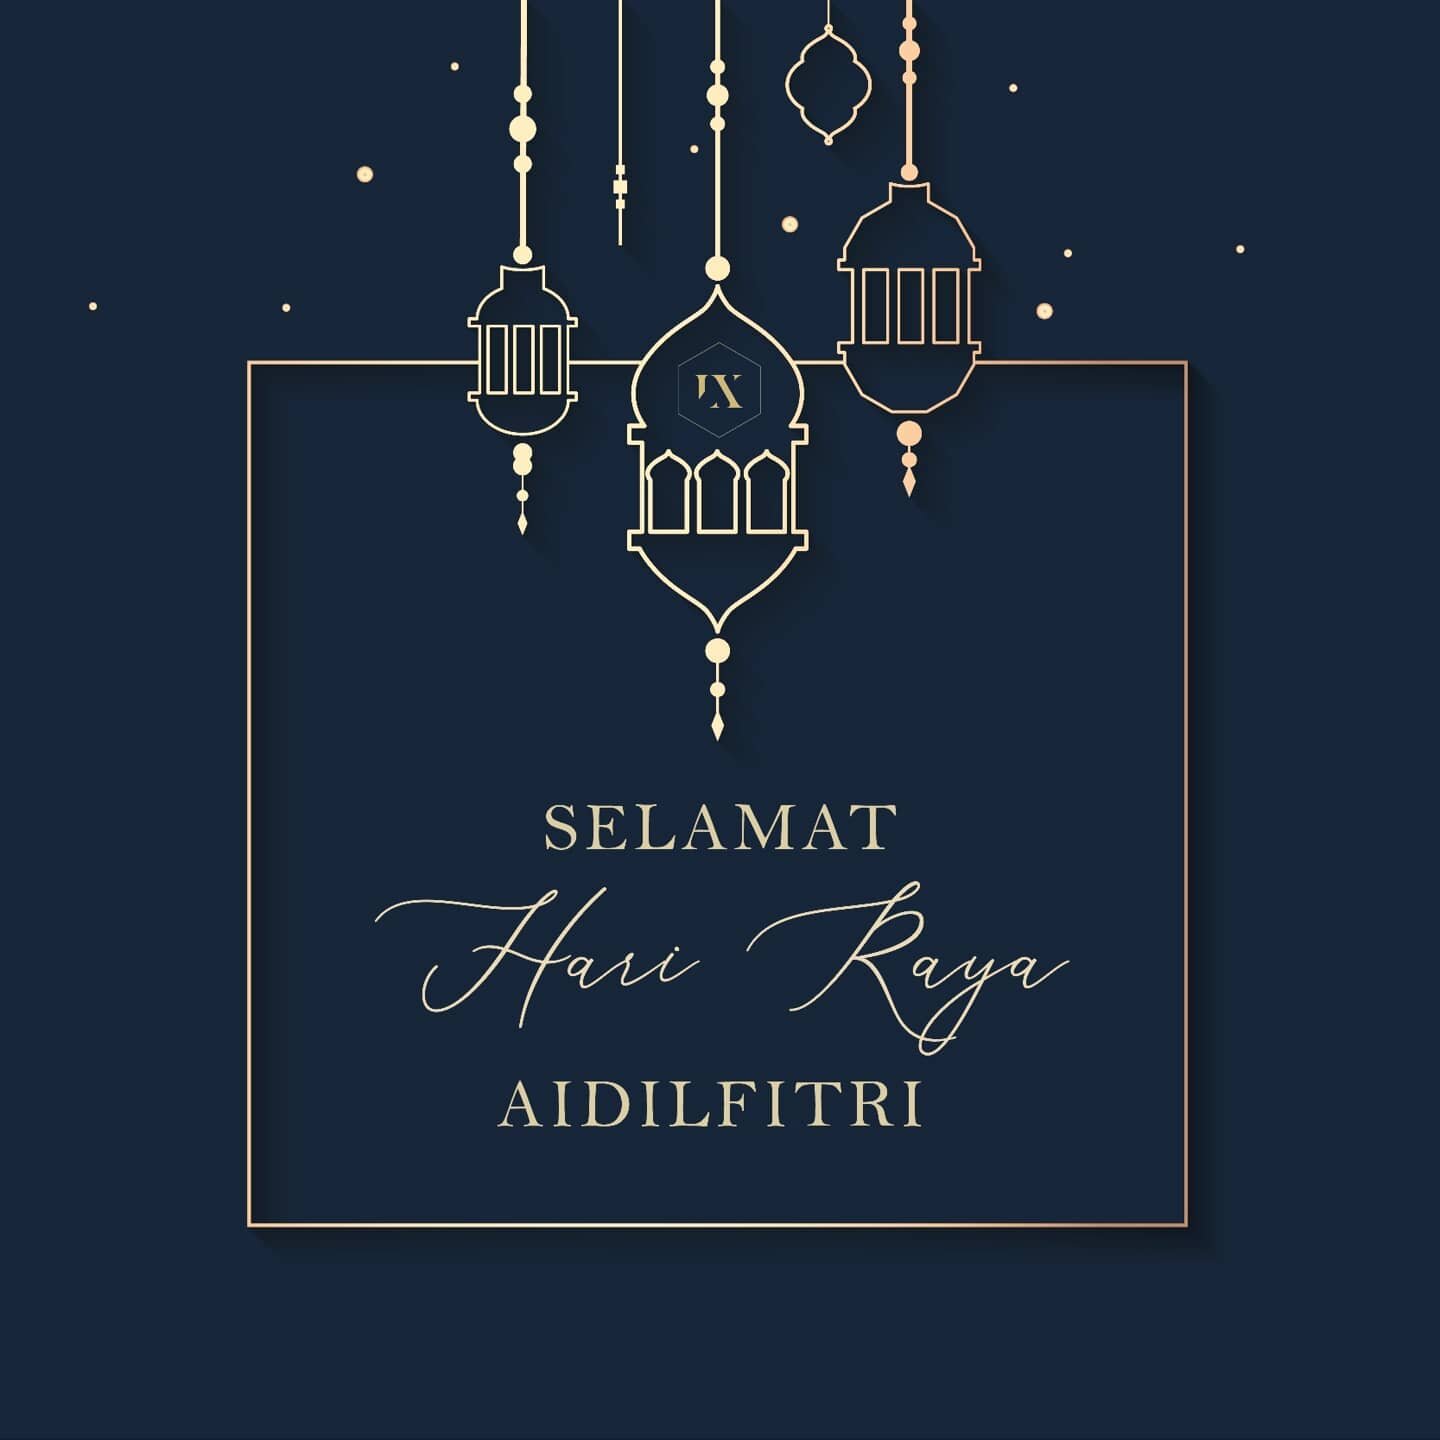 We wish all our Muslim clients and followers a happy and blessed Eid! ✨ Enjoy and stay safe everyone! ☺